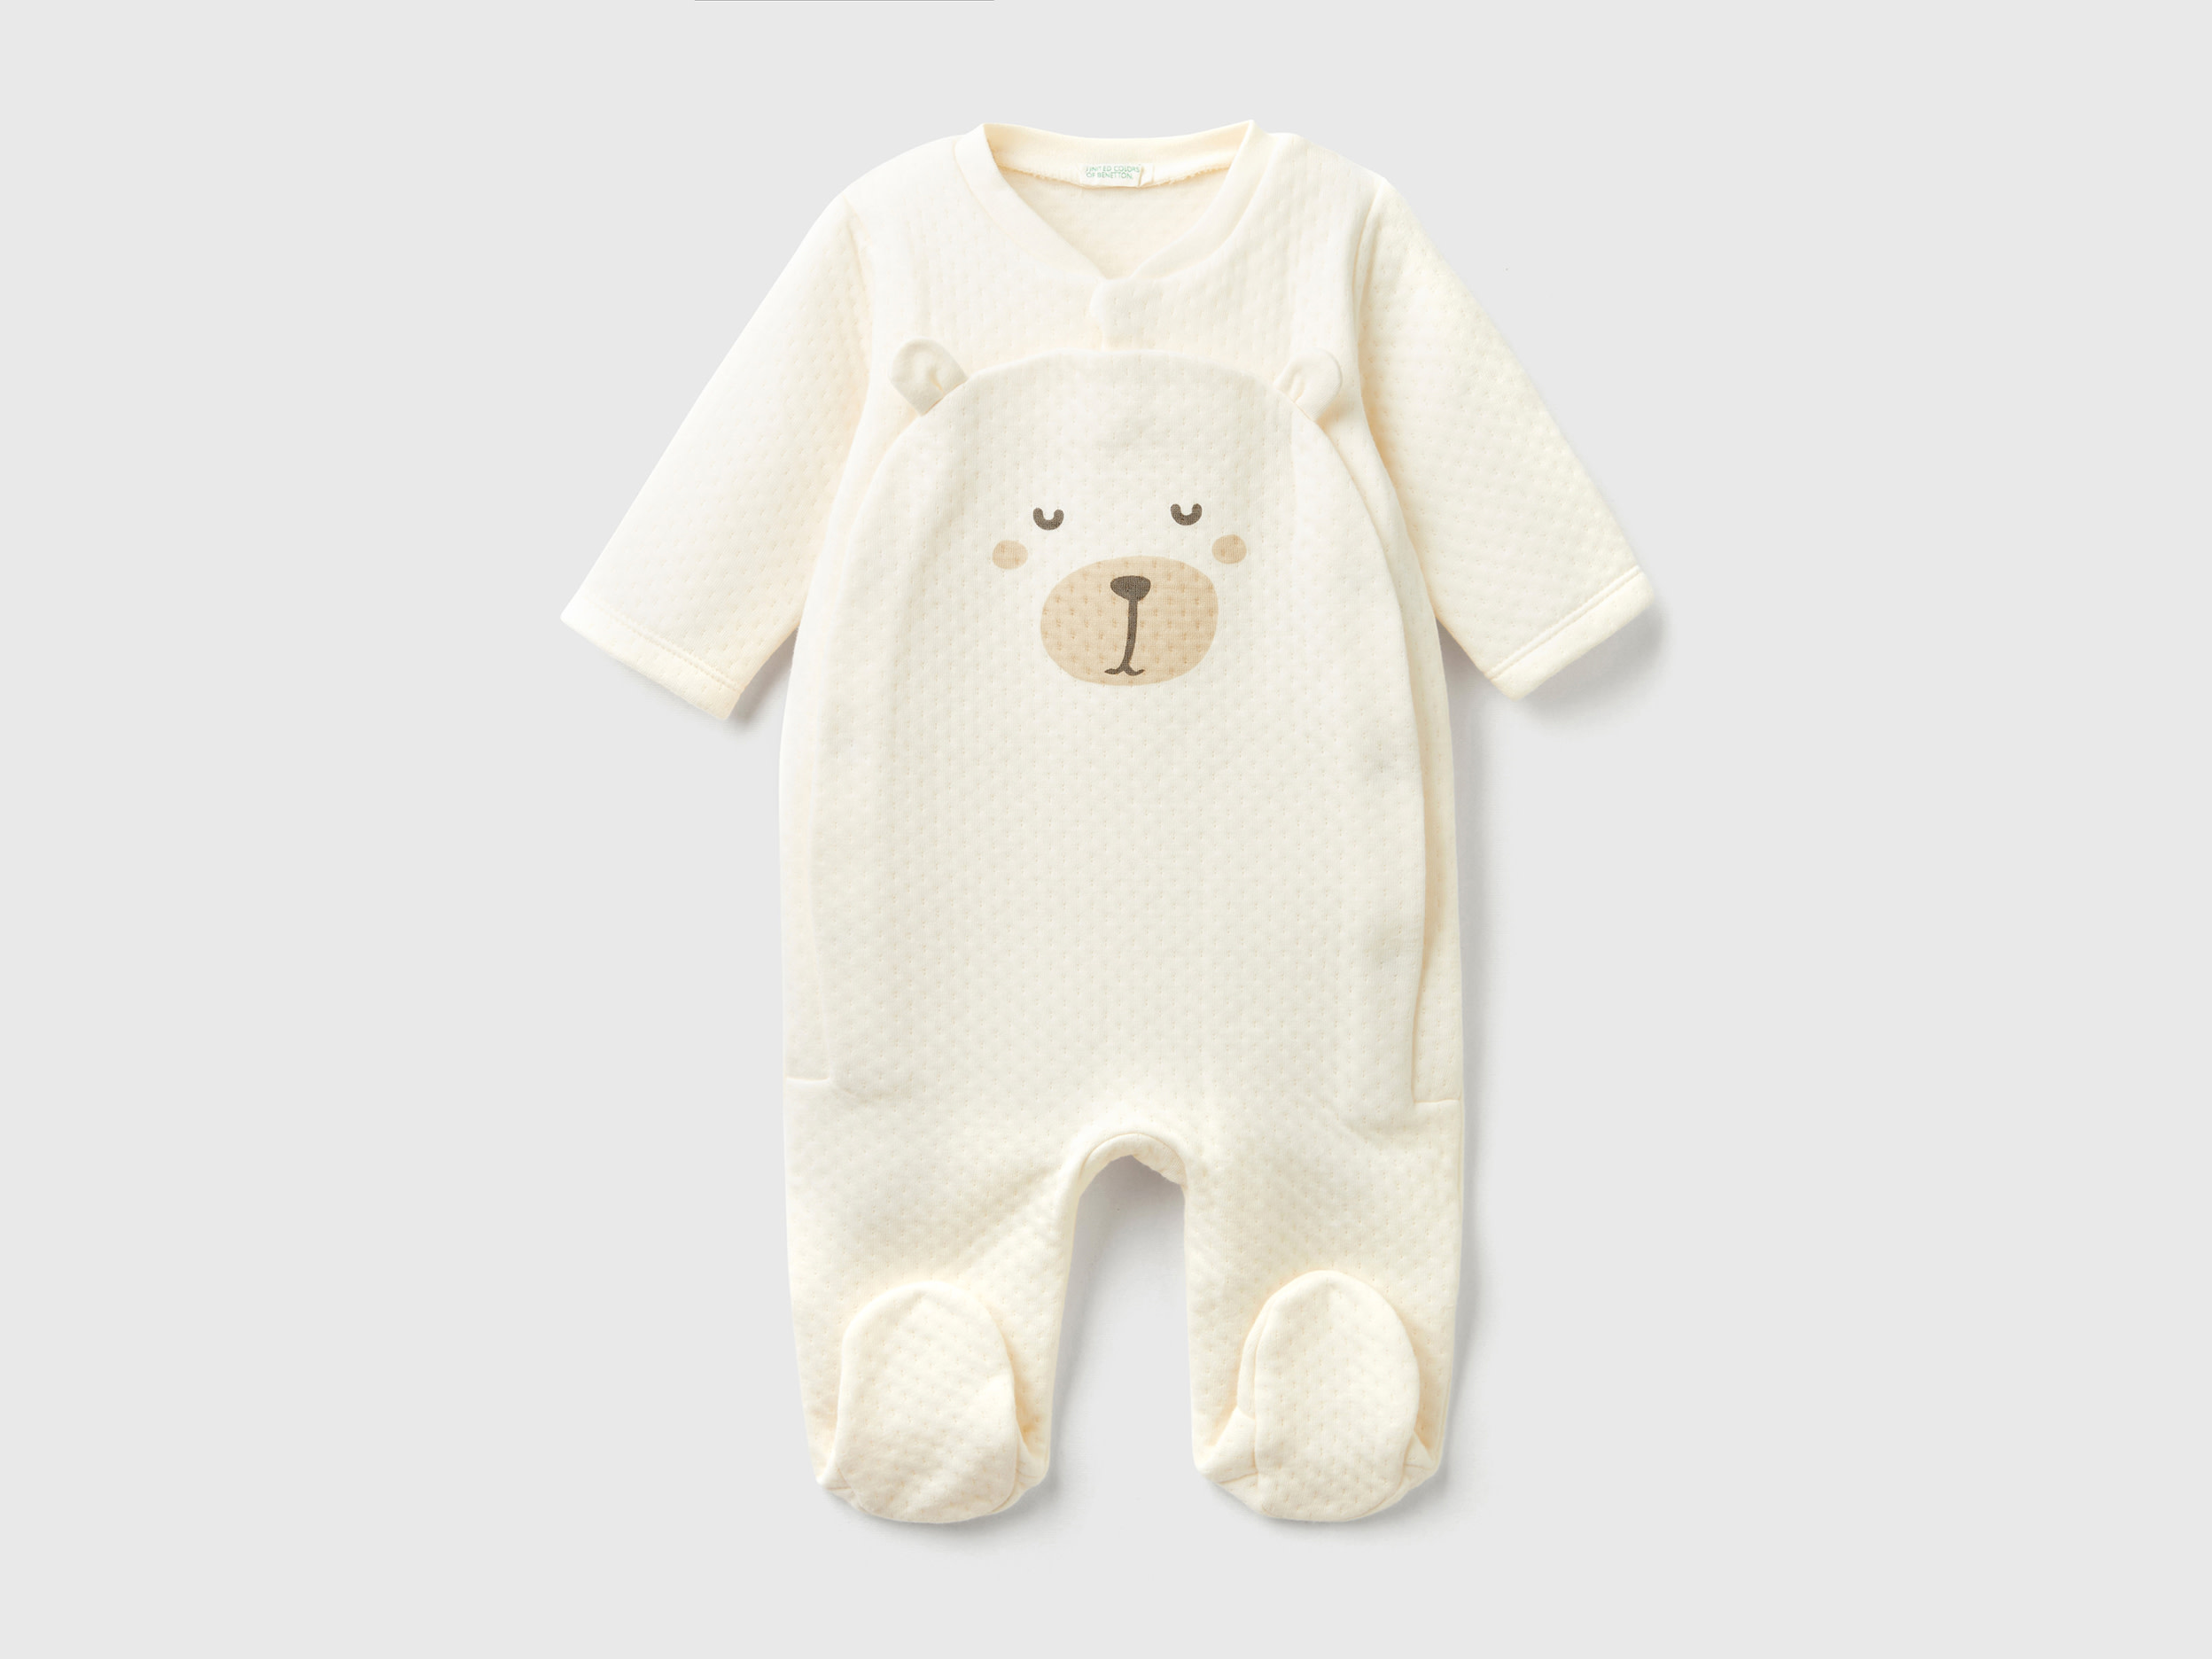 Benetton, Teddy Bear Onesie With Quilted Look, size 12-18, Creamy White, Kids